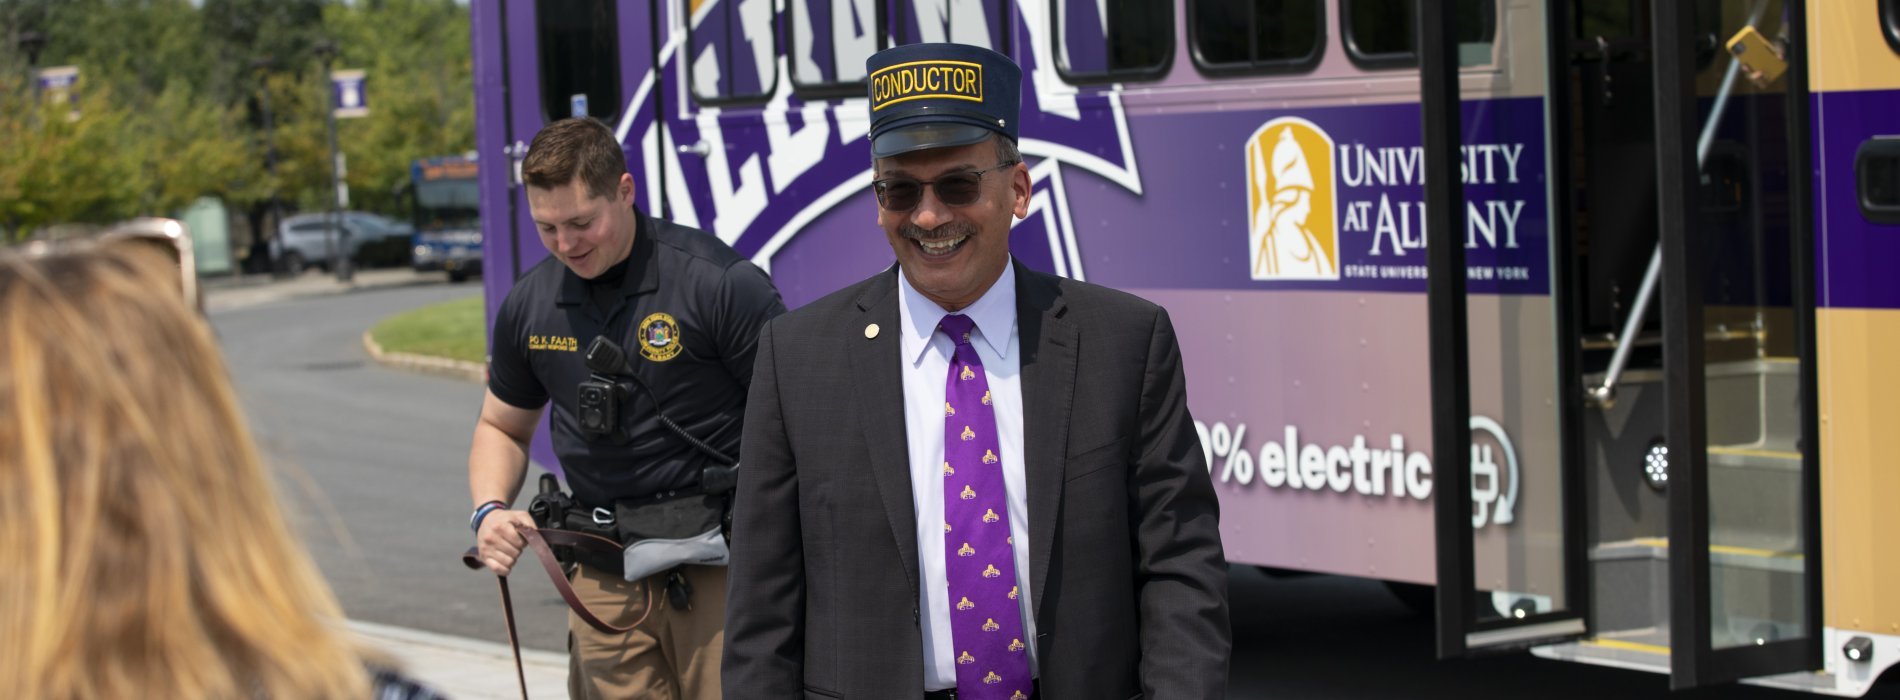 President Havidán in a Conductor hat in front of the new UAlbany trolley 